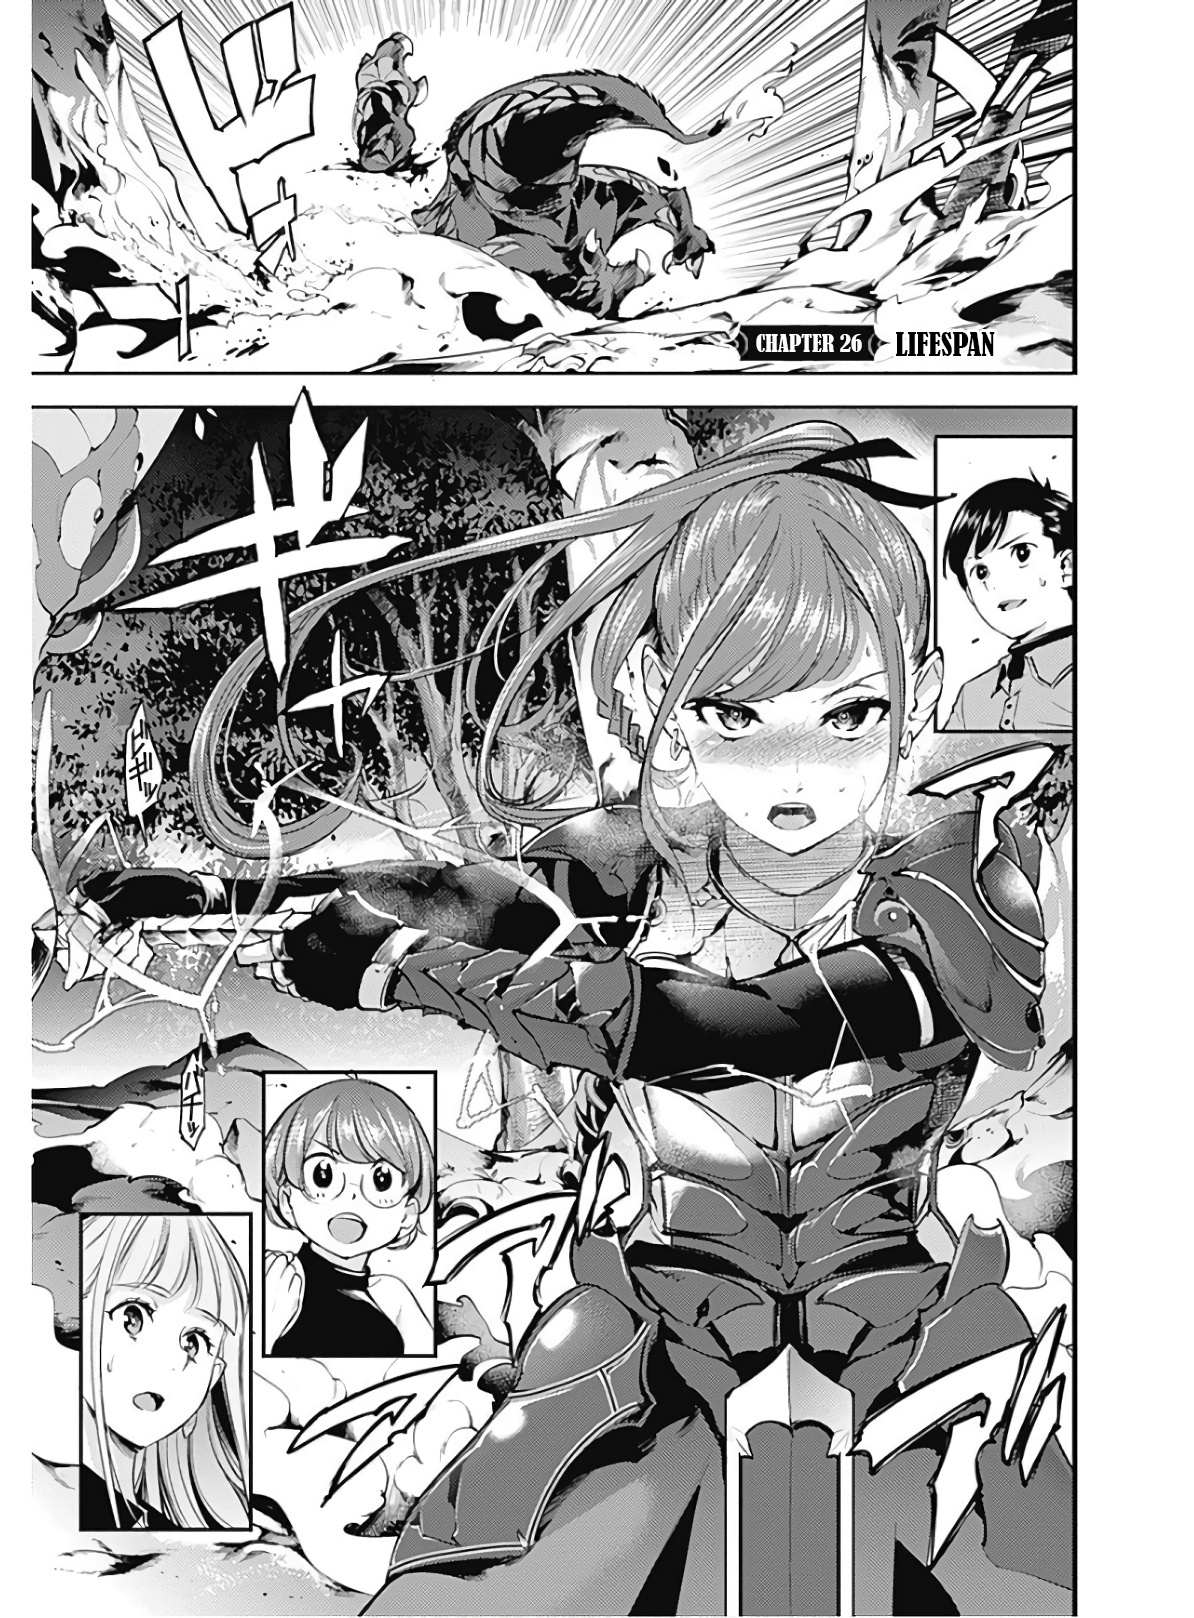 World's End Harem - Fantasia Chapter 26: Lifespan - Picture 3